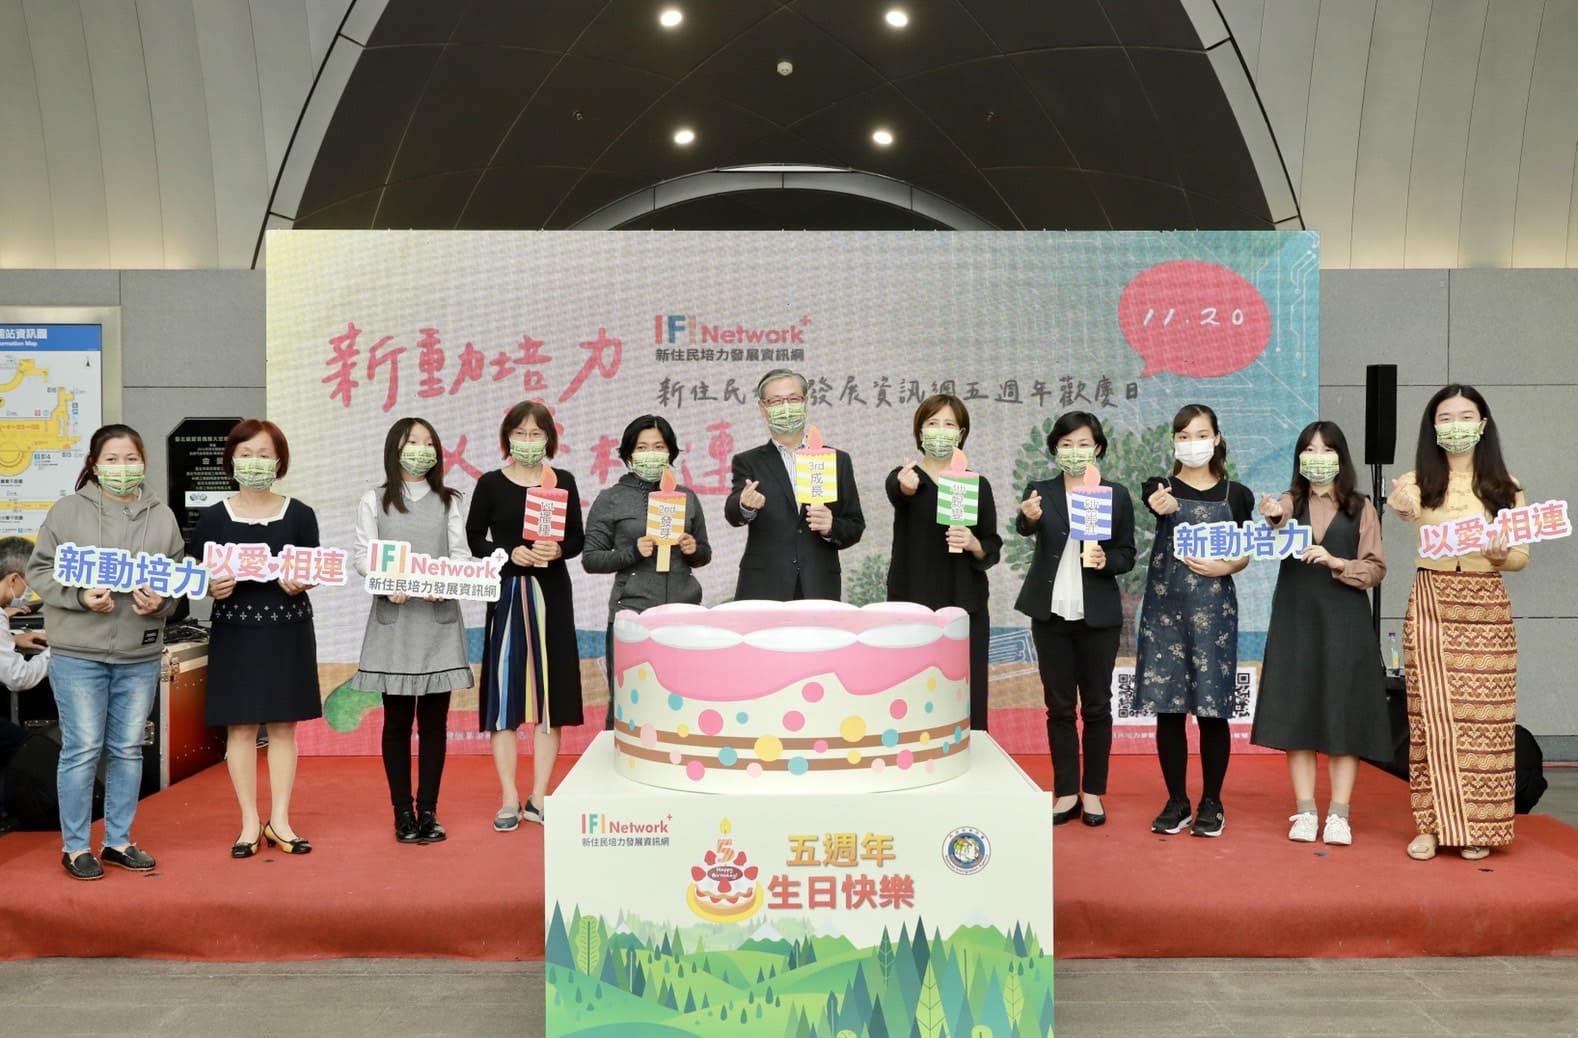 The Director of NIA - Zhong Jing Kun (Middle), the member of New Immigrants Development Fund Management Committee - Ye Bi Zhu (5th from left), Section Director of NIA Huang Ling Yu (4th from left), the CEO of The Pearl S. Buck Foundation, Taipei, Taiwan - Xiao Xiu Ling (5th from right), The Deputy Secretary-general of the YWCA of Taiwan Guo Nai Qi (4th from right) and winners of the New Immigrant Development Program celebrated the 5th anniversary of the ‘New Immigrants Development Information’ website. (Photo / Provided by the NIA)